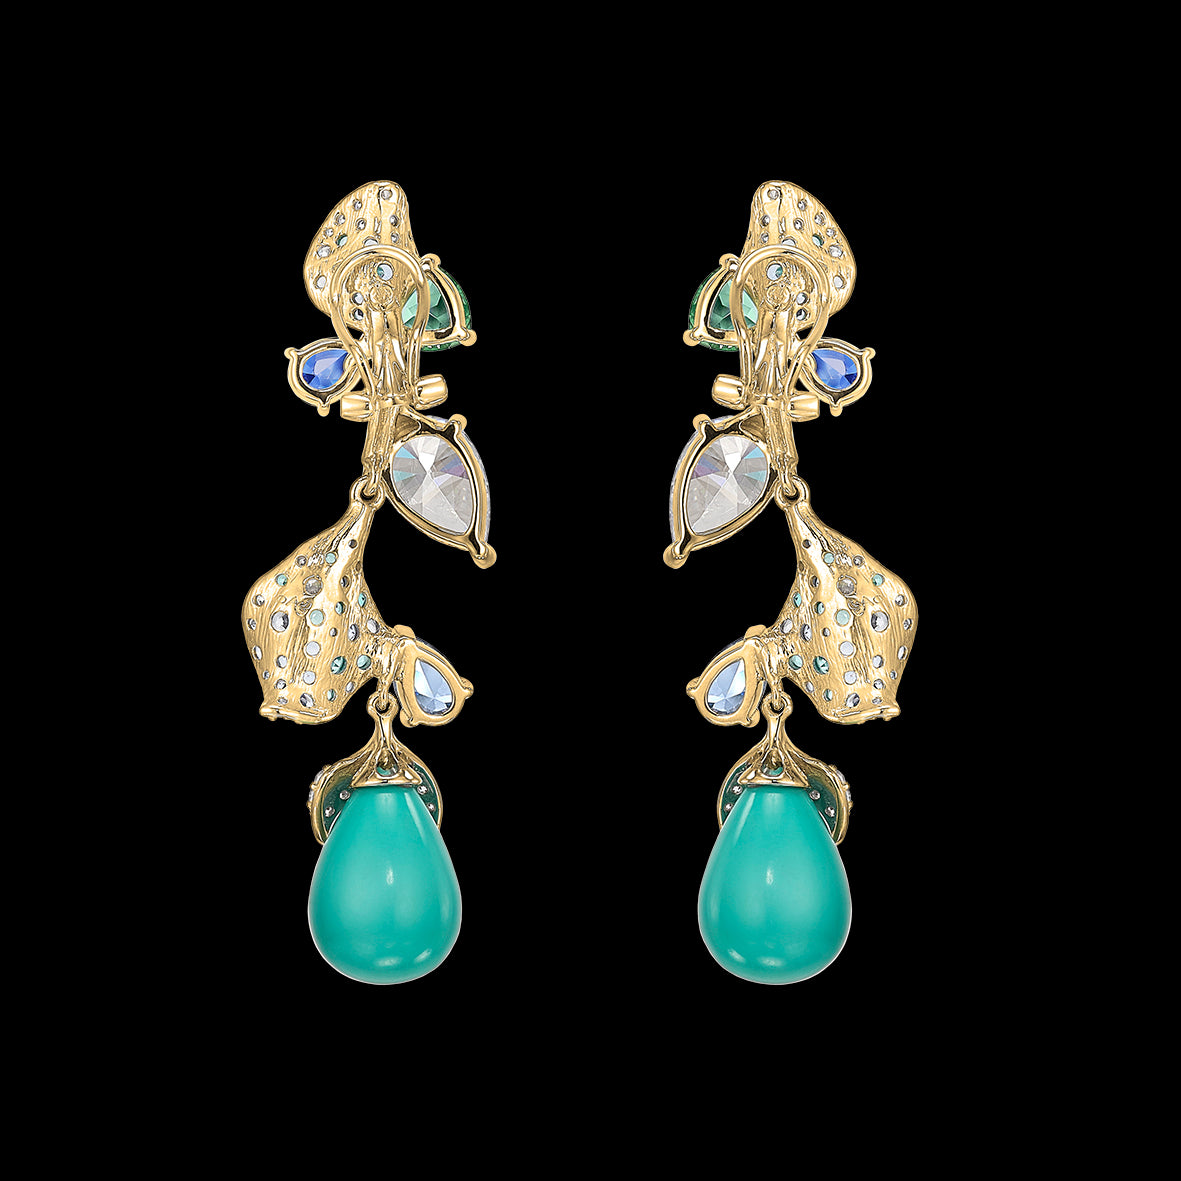 Turquoise Galatea Earrings, Earring, Anabela Chan Joaillerie - Fine jewelry with laboratory grown and created gemstones hand-crafted in the United Kingdom. Anabela Chan Joaillerie is the first fine jewellery brand in the world to champion laboratory-grown and created gemstones with high jewellery design, artisanal craftsmanship and a focus on ethical and sustainable innovations.